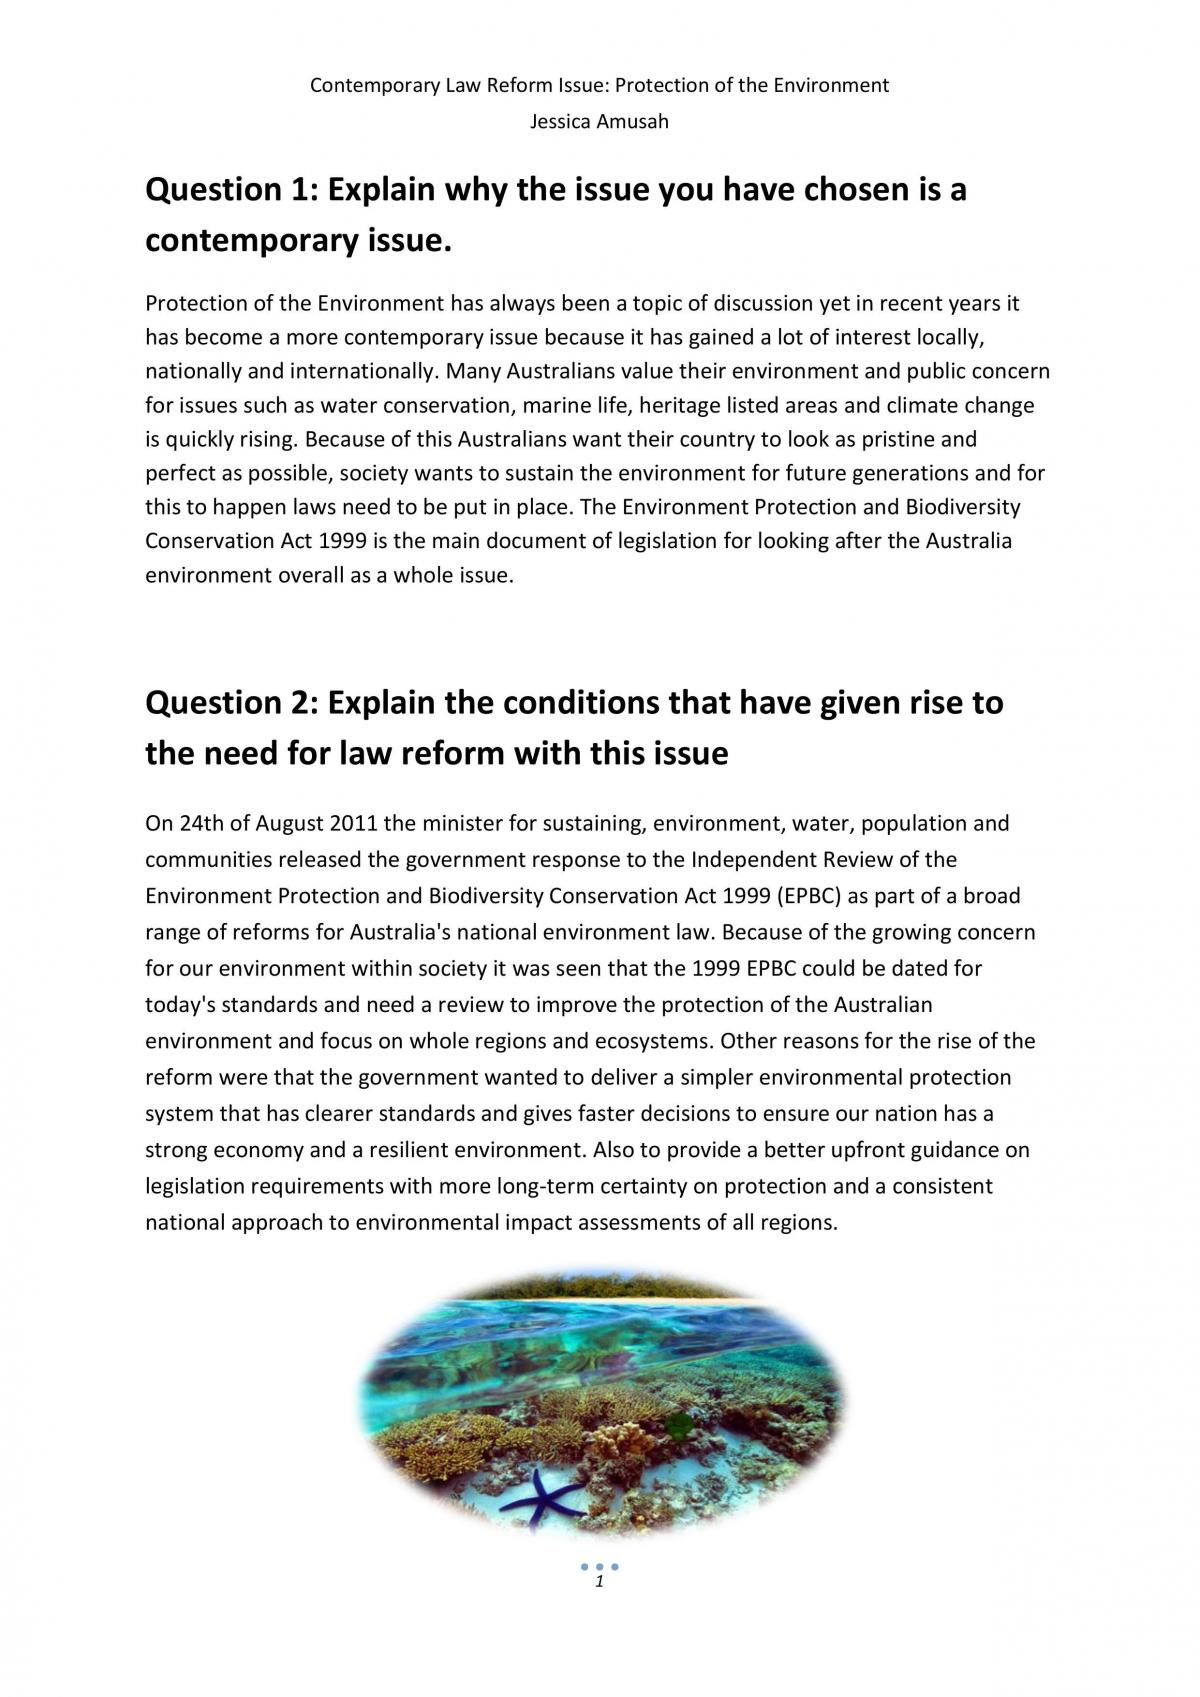 Law reform: Protection of Environment - Page 1